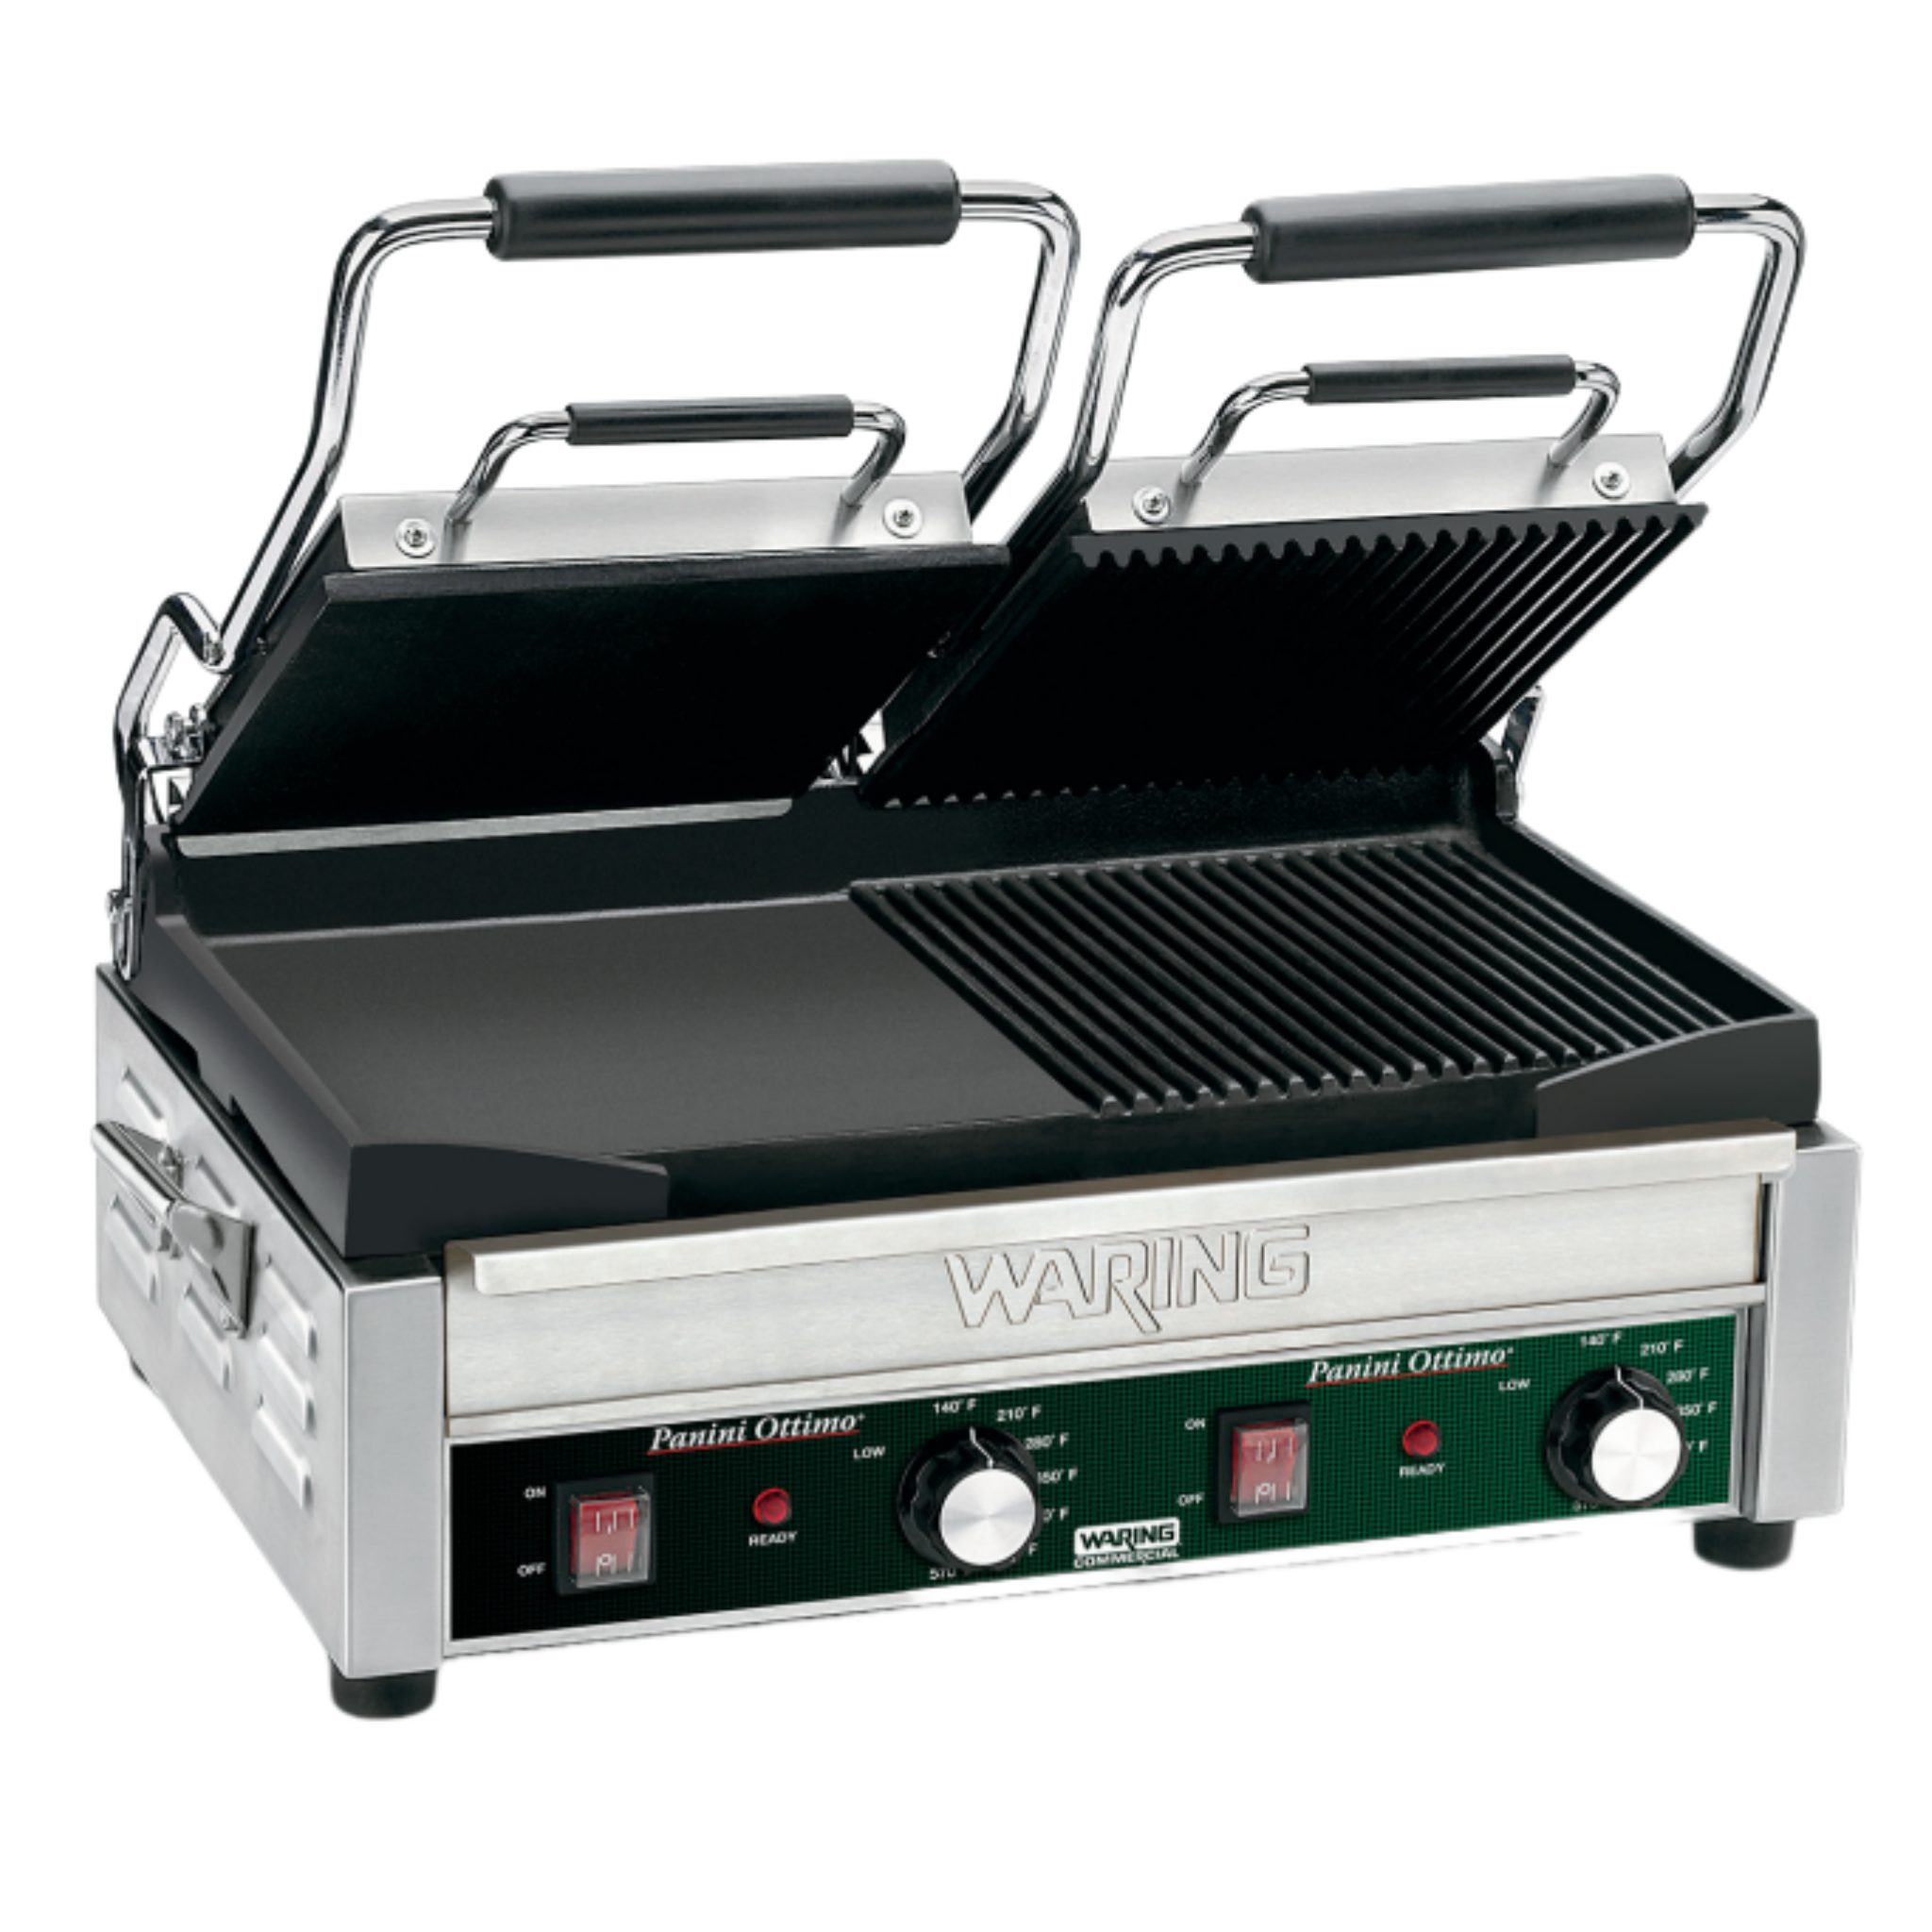 WDG300 Hybrid Panini Ottimo - Double Panini & Flat Grill by Waring Commercial